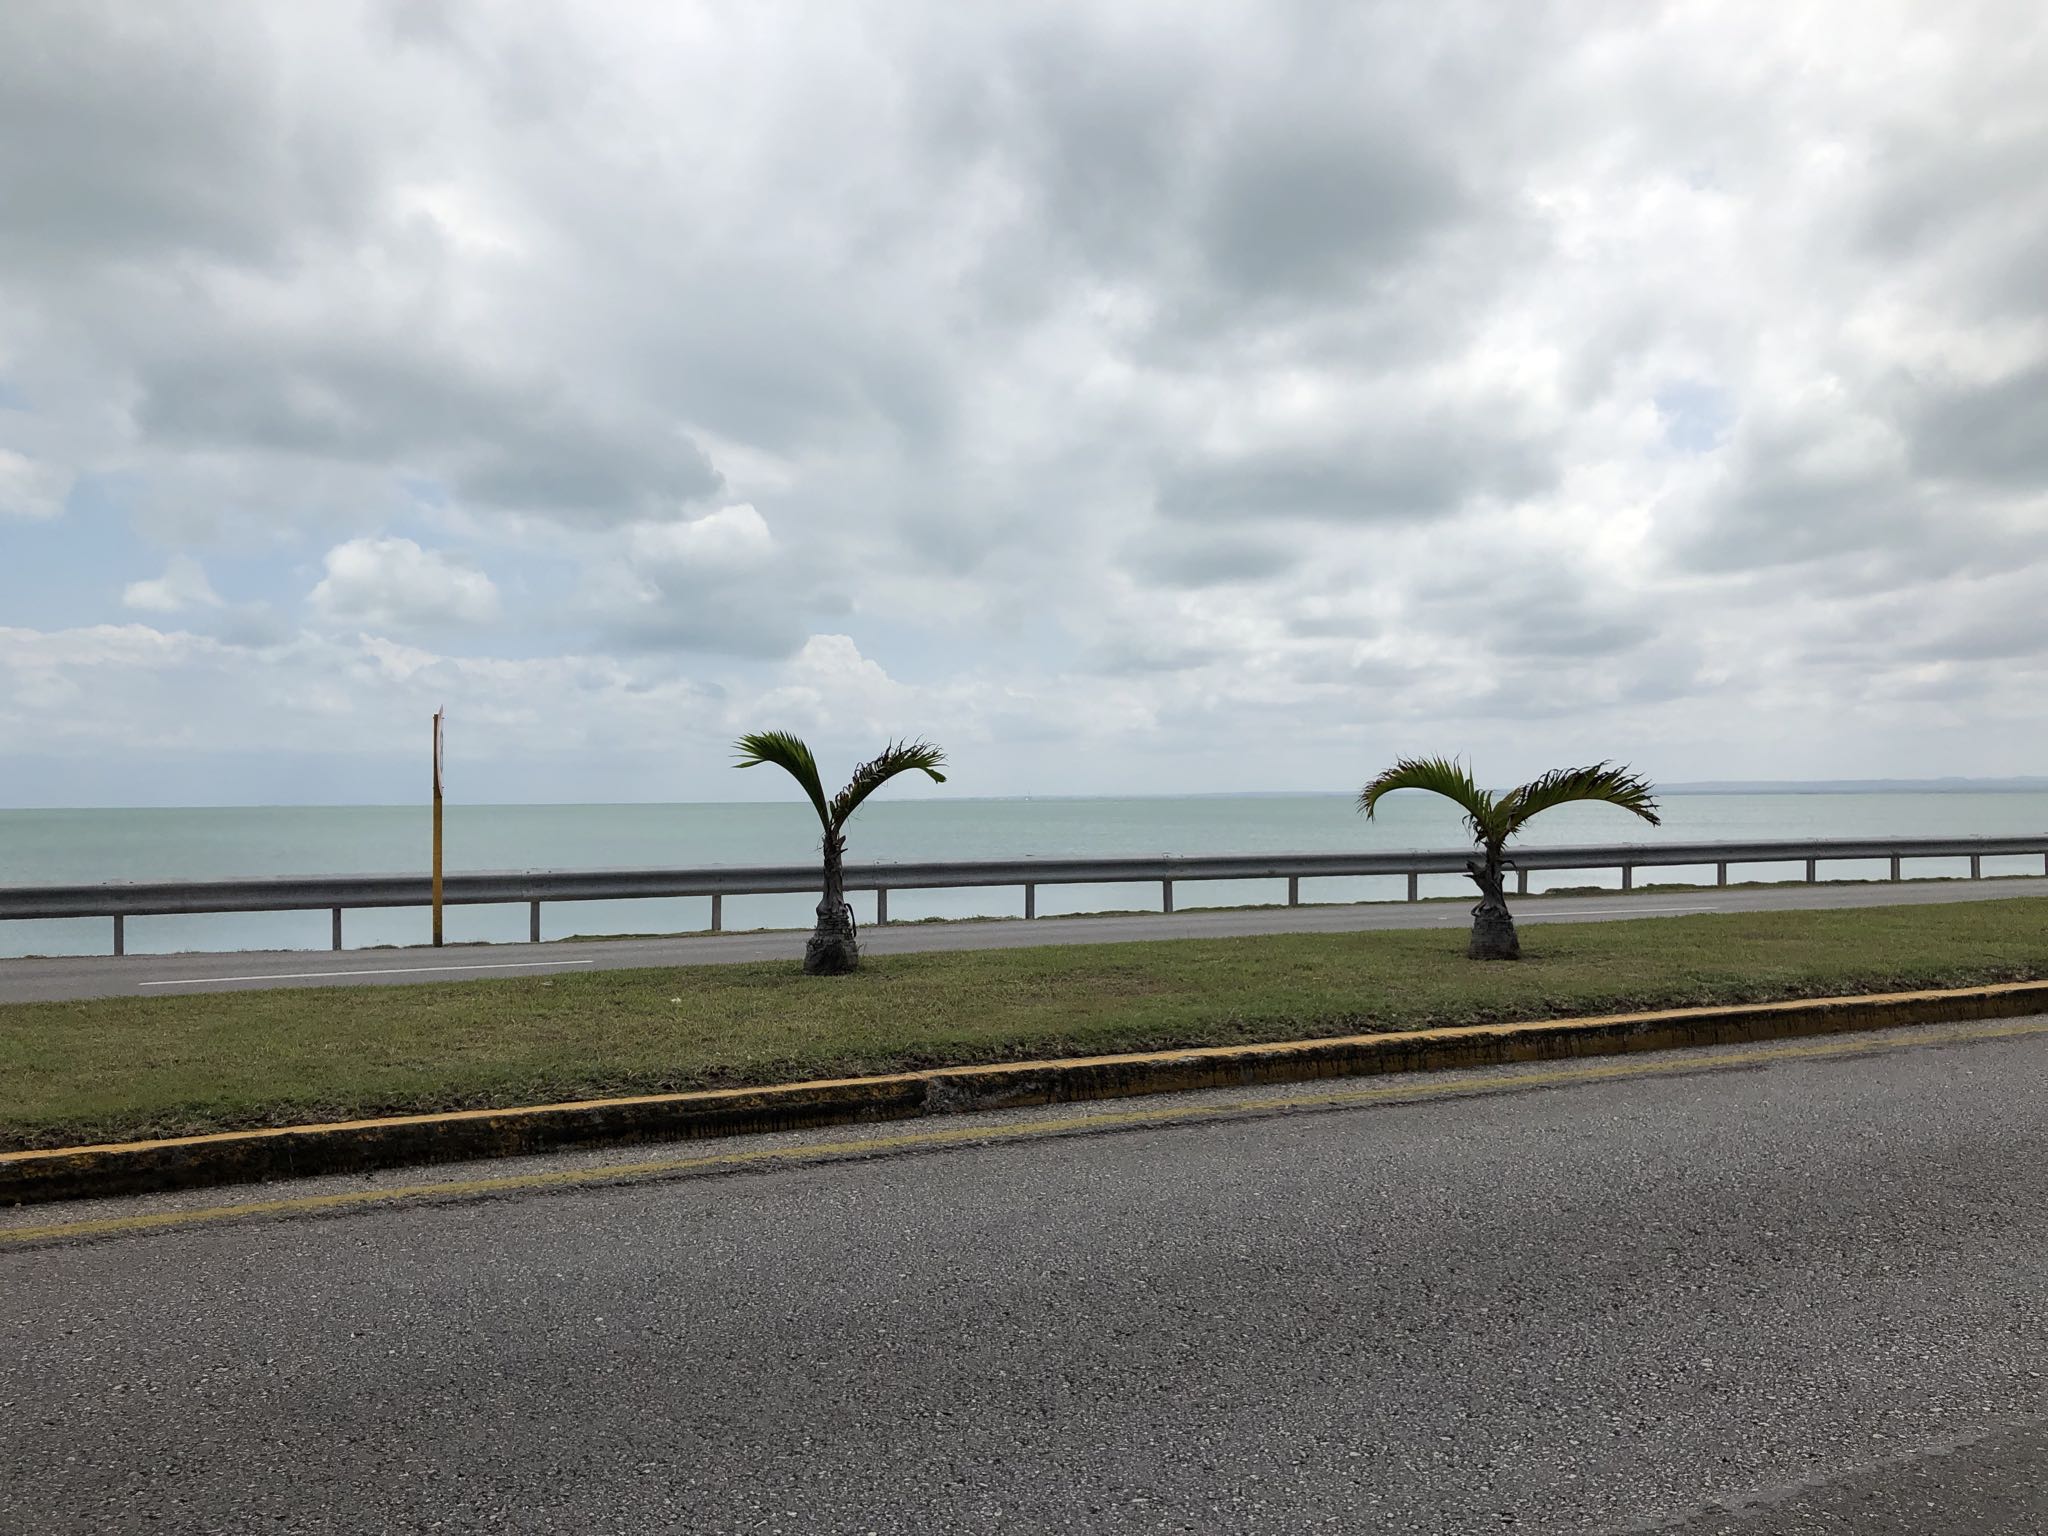 Photo 211 of 221 from the album Highlights Cuba 2019.